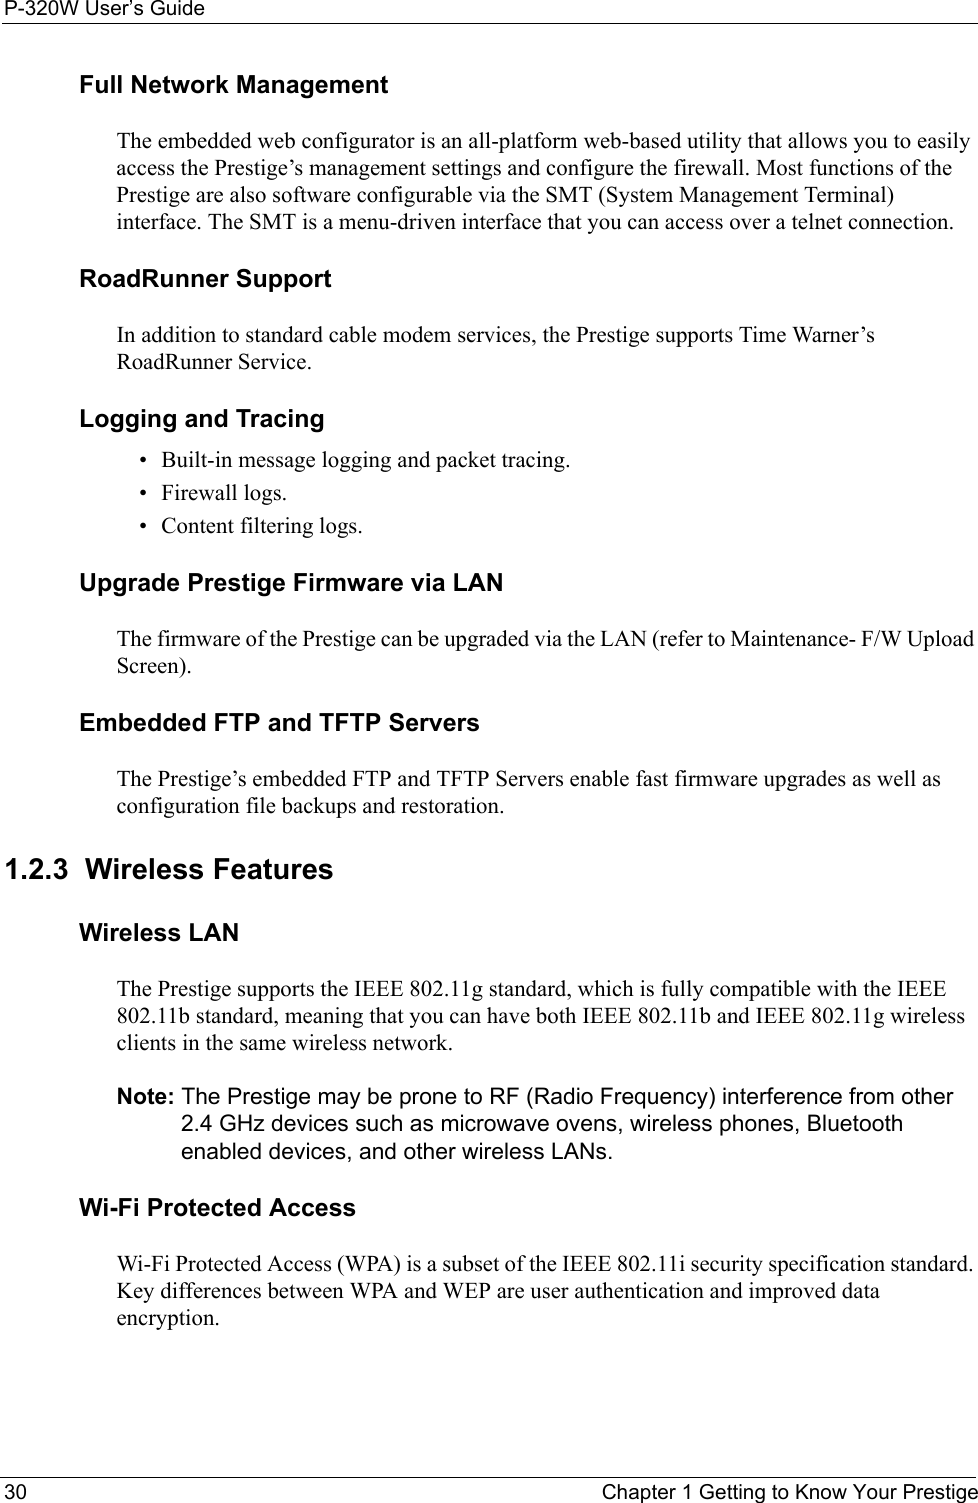 P-320W User’s Guide30  Chapter 1 Getting to Know Your PrestigeFull Network ManagementThe embedded web configurator is an all-platform web-based utility that allows you to easily access the Prestige’s management settings and configure the firewall. Most functions of the Prestige are also software configurable via the SMT (System Management Terminal) interface. The SMT is a menu-driven interface that you can access over a telnet connection. RoadRunner SupportIn addition to standard cable modem services, the Prestige supports Time Warner’s RoadRunner Service.Logging and Tracing• Built-in message logging and packet tracing.• Firewall logs.• Content filtering logs.Upgrade Prestige Firmware via LANThe firmware of the Prestige can be upgraded via the LAN (refer to Maintenance- F/W Upload Screen).Embedded FTP and TFTP ServersThe Prestige’s embedded FTP and TFTP Servers enable fast firmware upgrades as well as configuration file backups and restoration.1.2.3  Wireless FeaturesWireless LANThe Prestige supports the IEEE 802.11g standard, which is fully compatible with the IEEE 802.11b standard, meaning that you can have both IEEE 802.11b and IEEE 802.11g wireless clients in the same wireless network.Note: The Prestige may be prone to RF (Radio Frequency) interference from other 2.4 GHz devices such as microwave ovens, wireless phones, Bluetooth enabled devices, and other wireless LANs.Wi-Fi Protected AccessWi-Fi Protected Access (WPA) is a subset of the IEEE 802.11i security specification standard. Key differences between WPA and WEP are user authentication and improved data encryption.